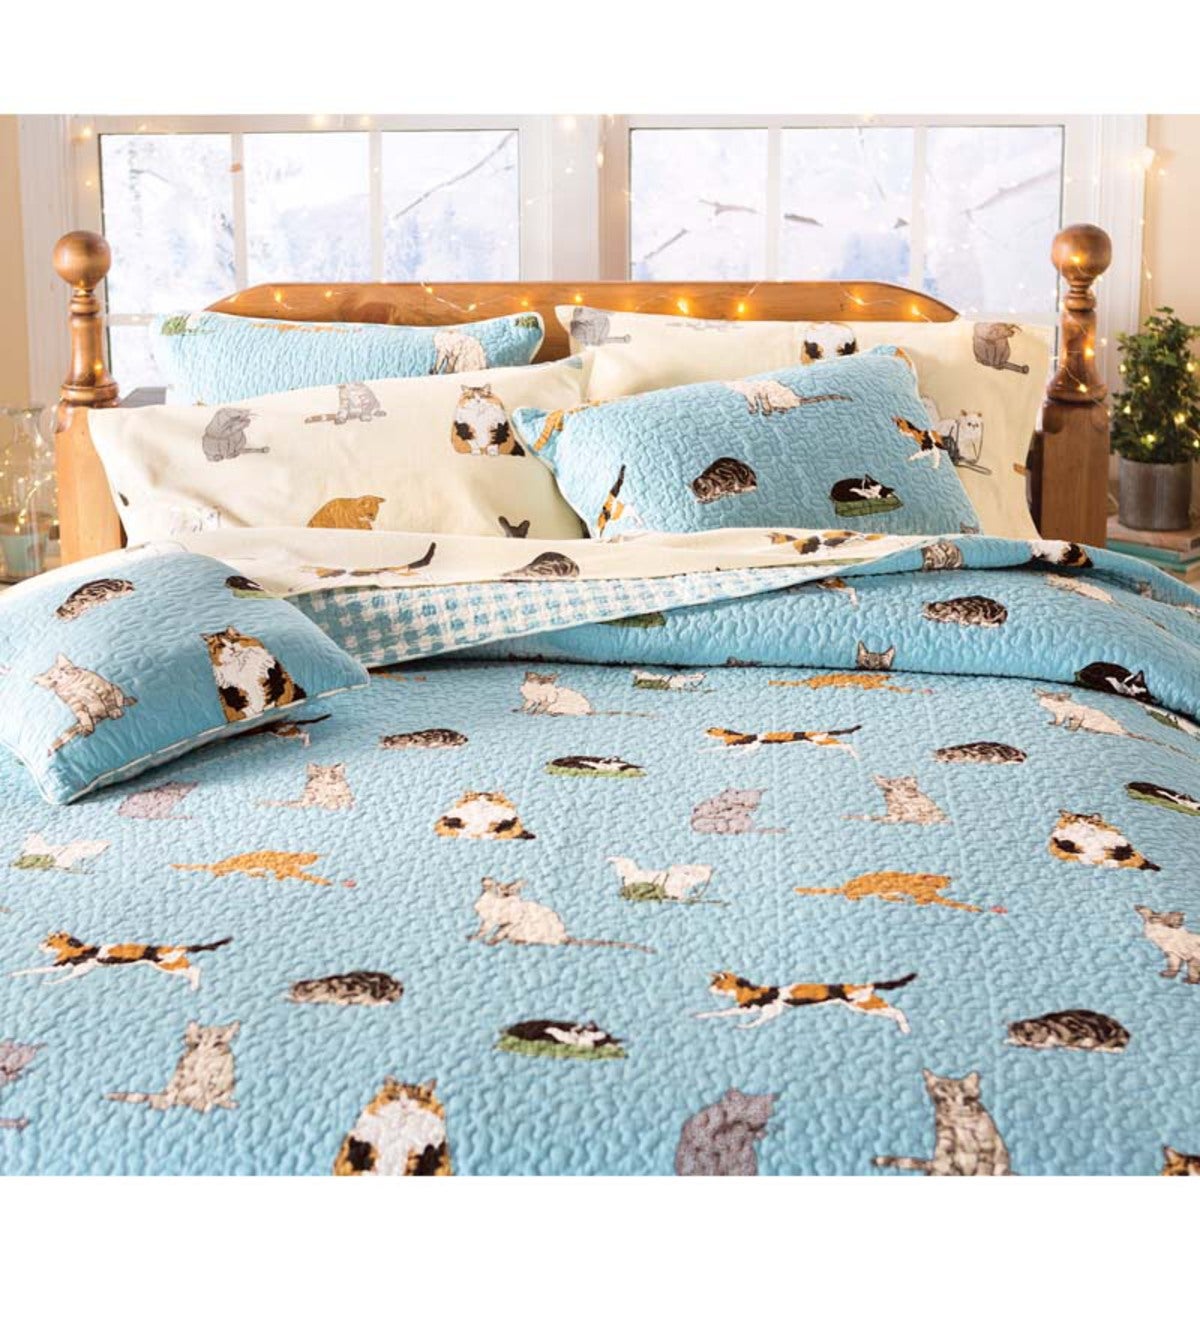 Best Decorative Quilts-Unique Quilted for Gifts Hippie Cat Quilt P156 PD King All-Season Quilts Comforters with Reversible Cotton King/Queen/Twin Size